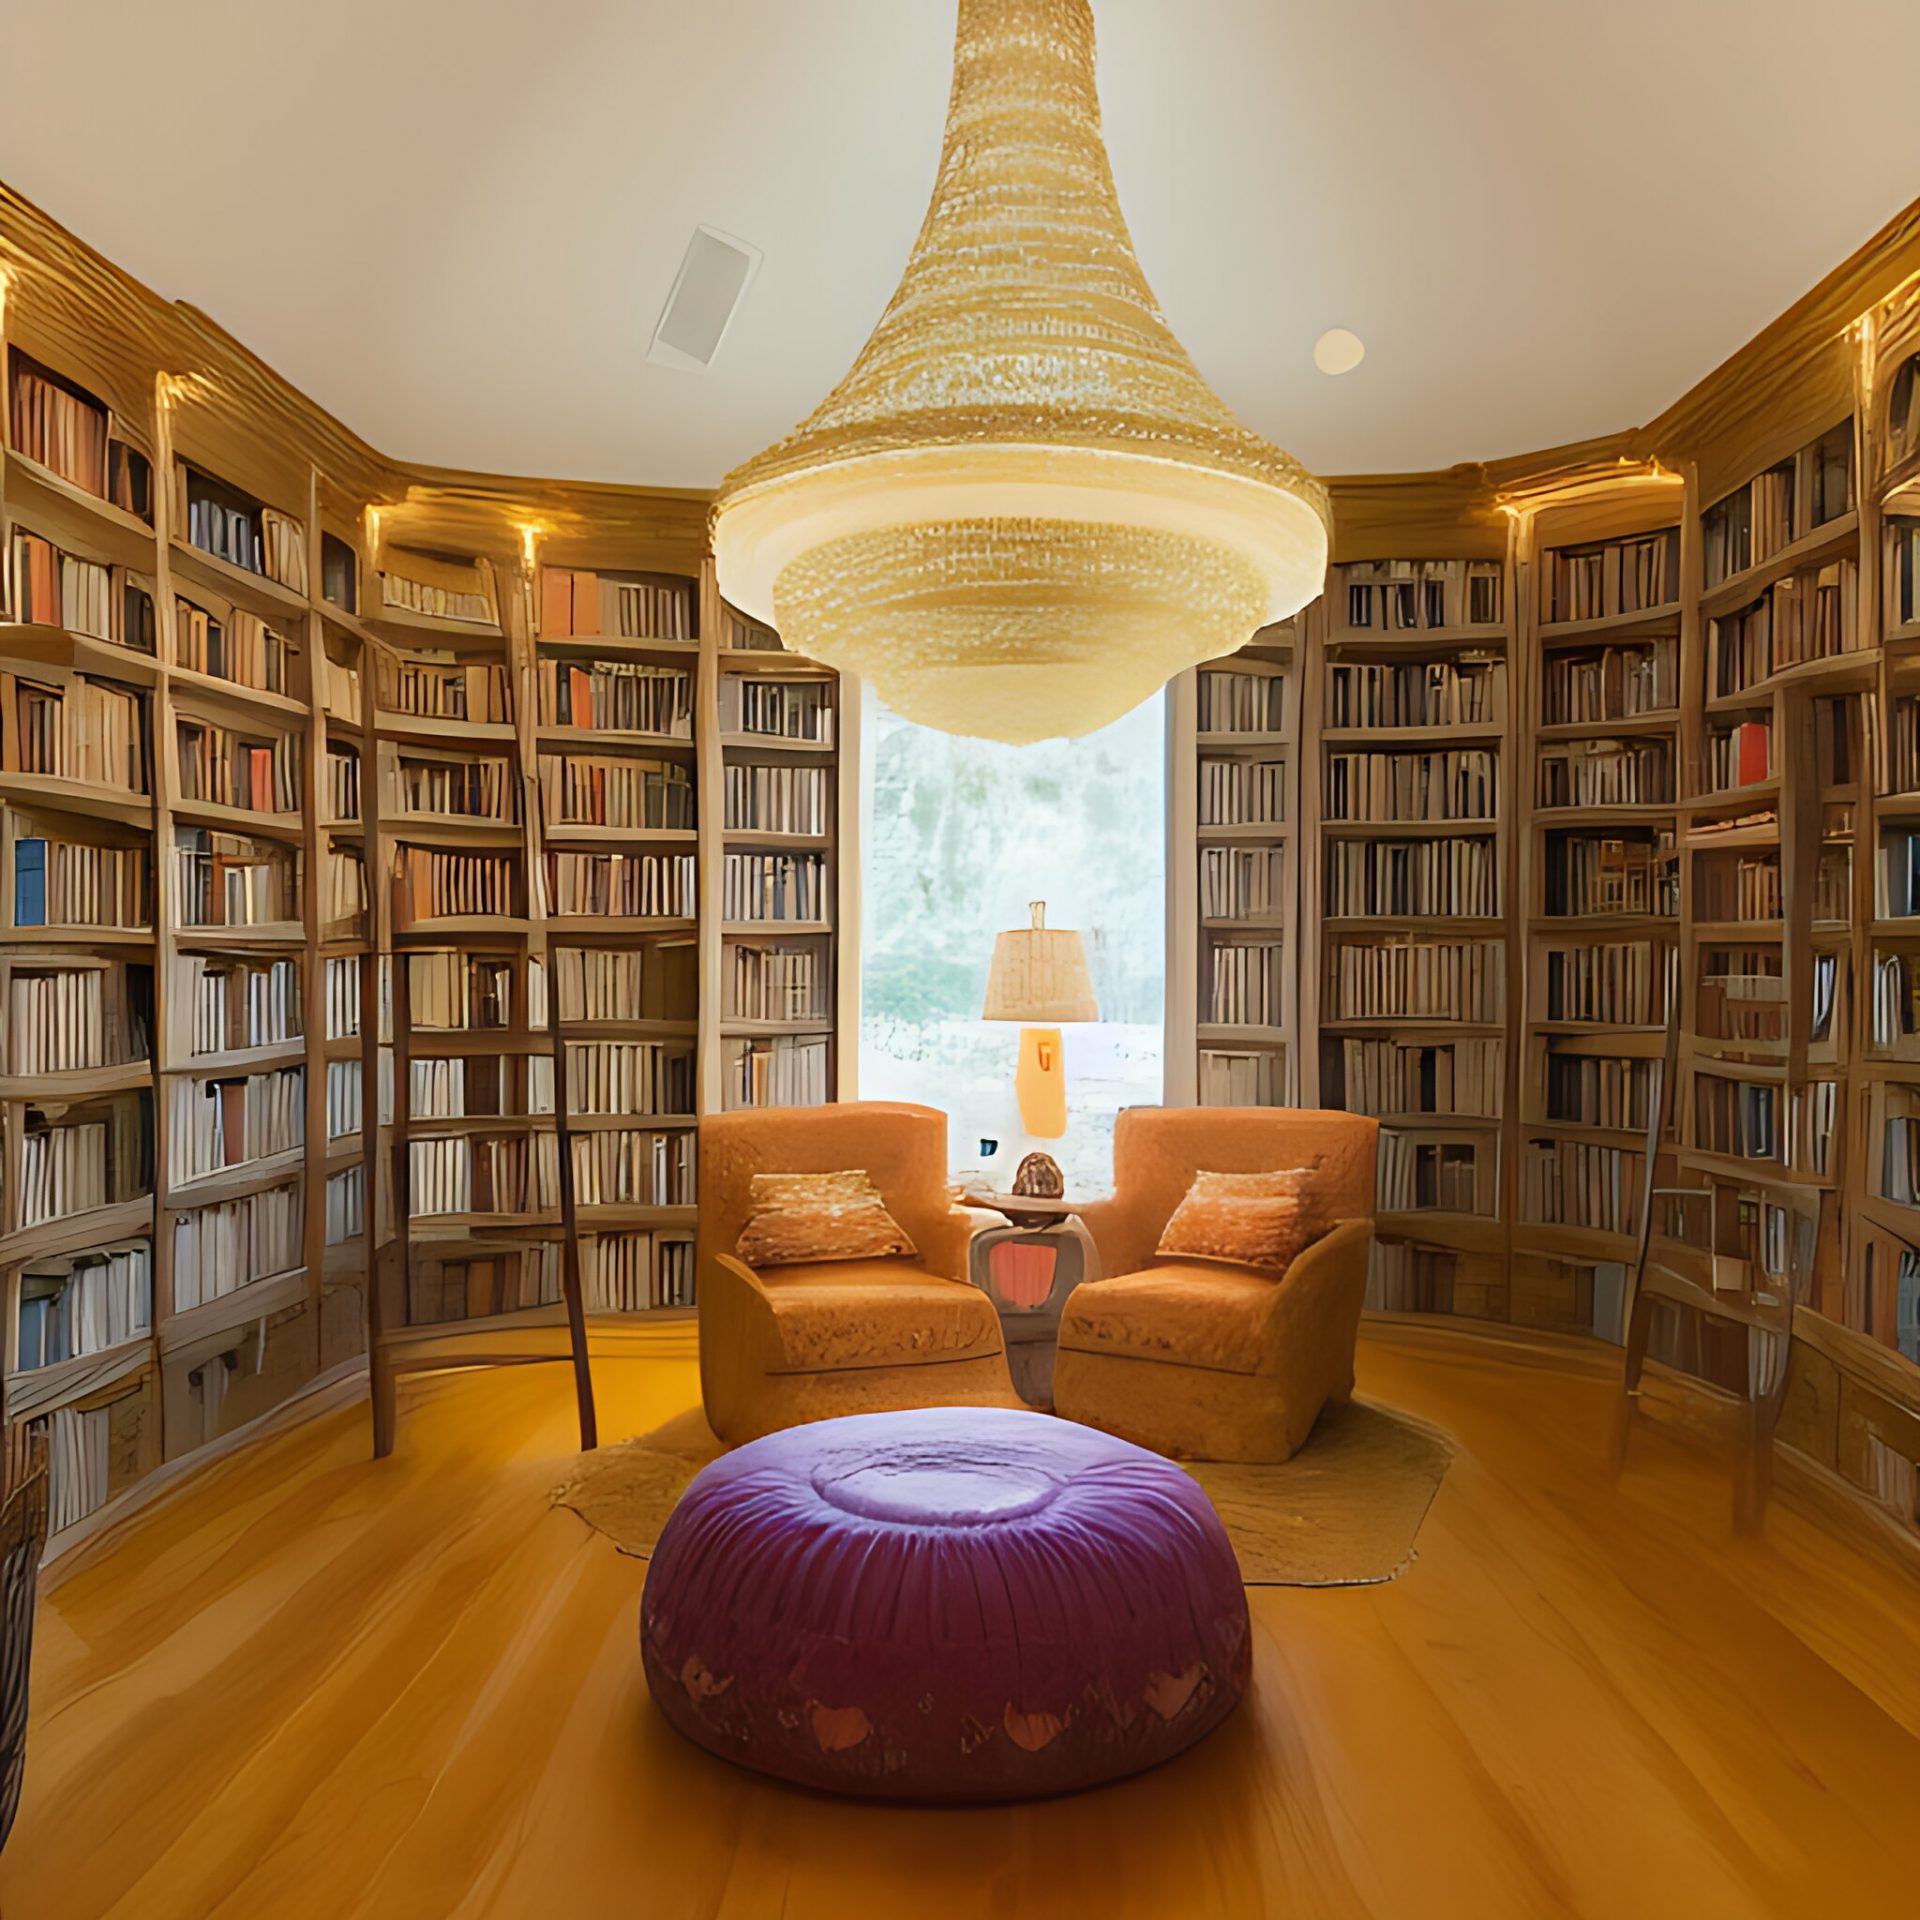 A cozy home library with floor-to-ceiling bookshelves, warm lighting, comfortable seating, and an oversized chandelier.